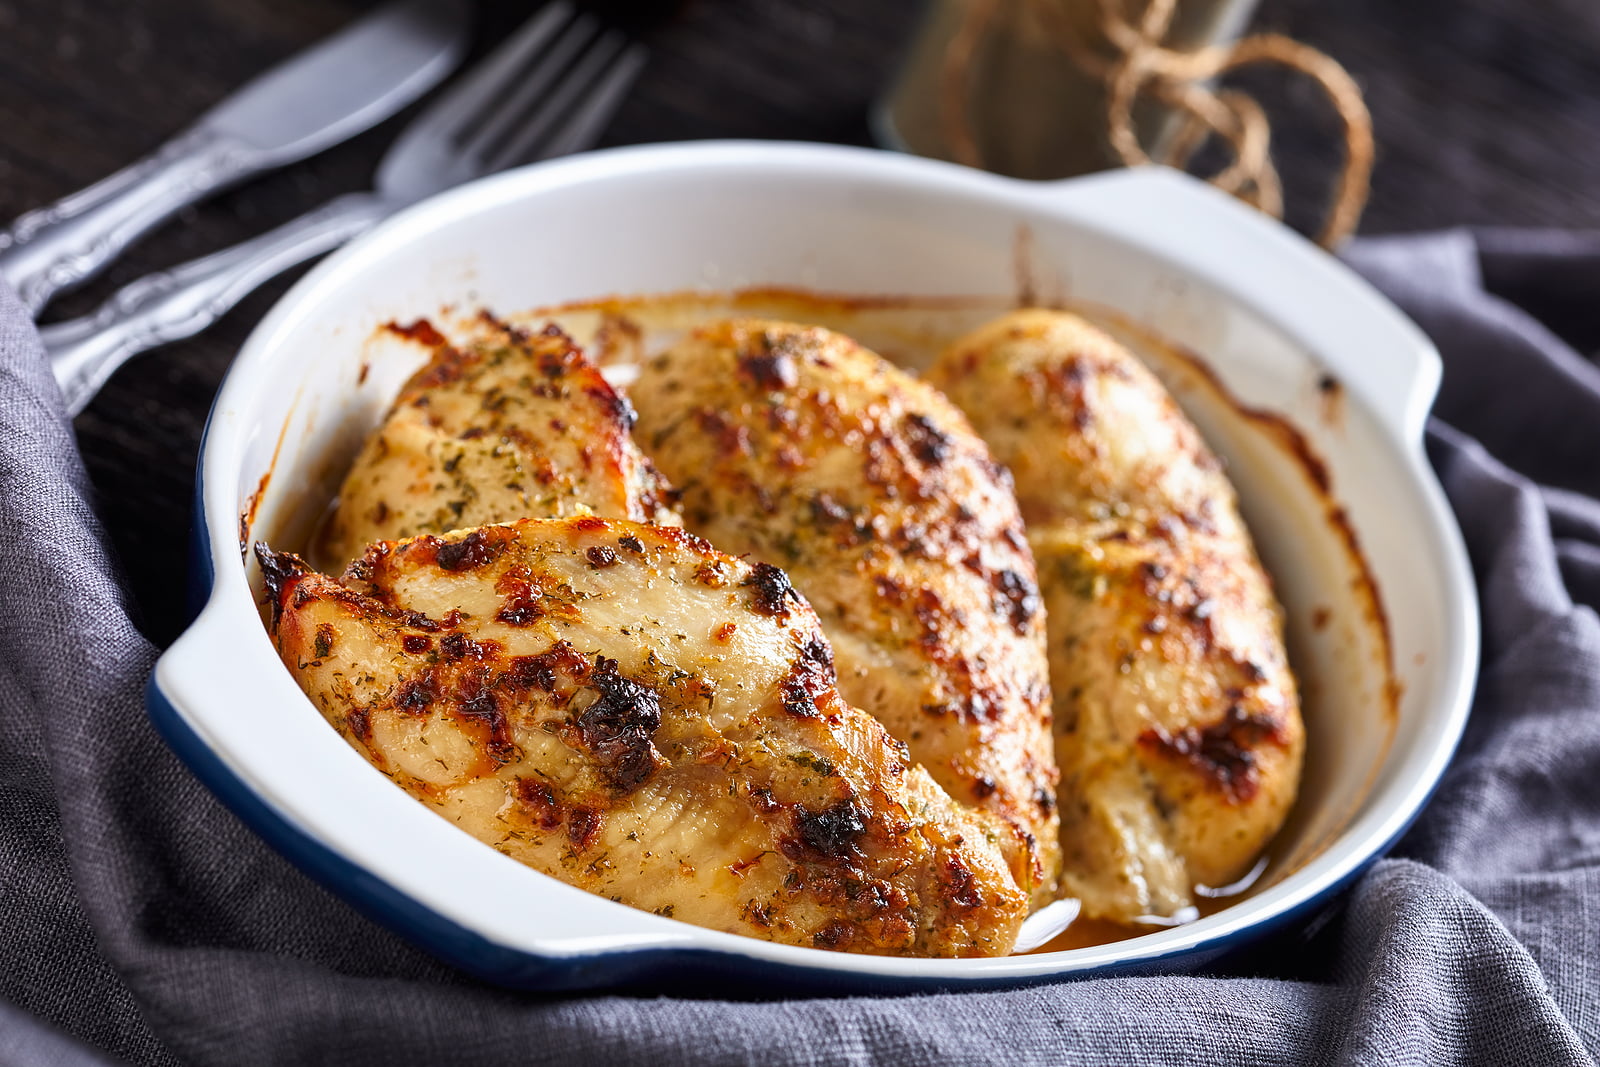 It’s healthy and delicious: Slow-roasted chicken breasts recipe